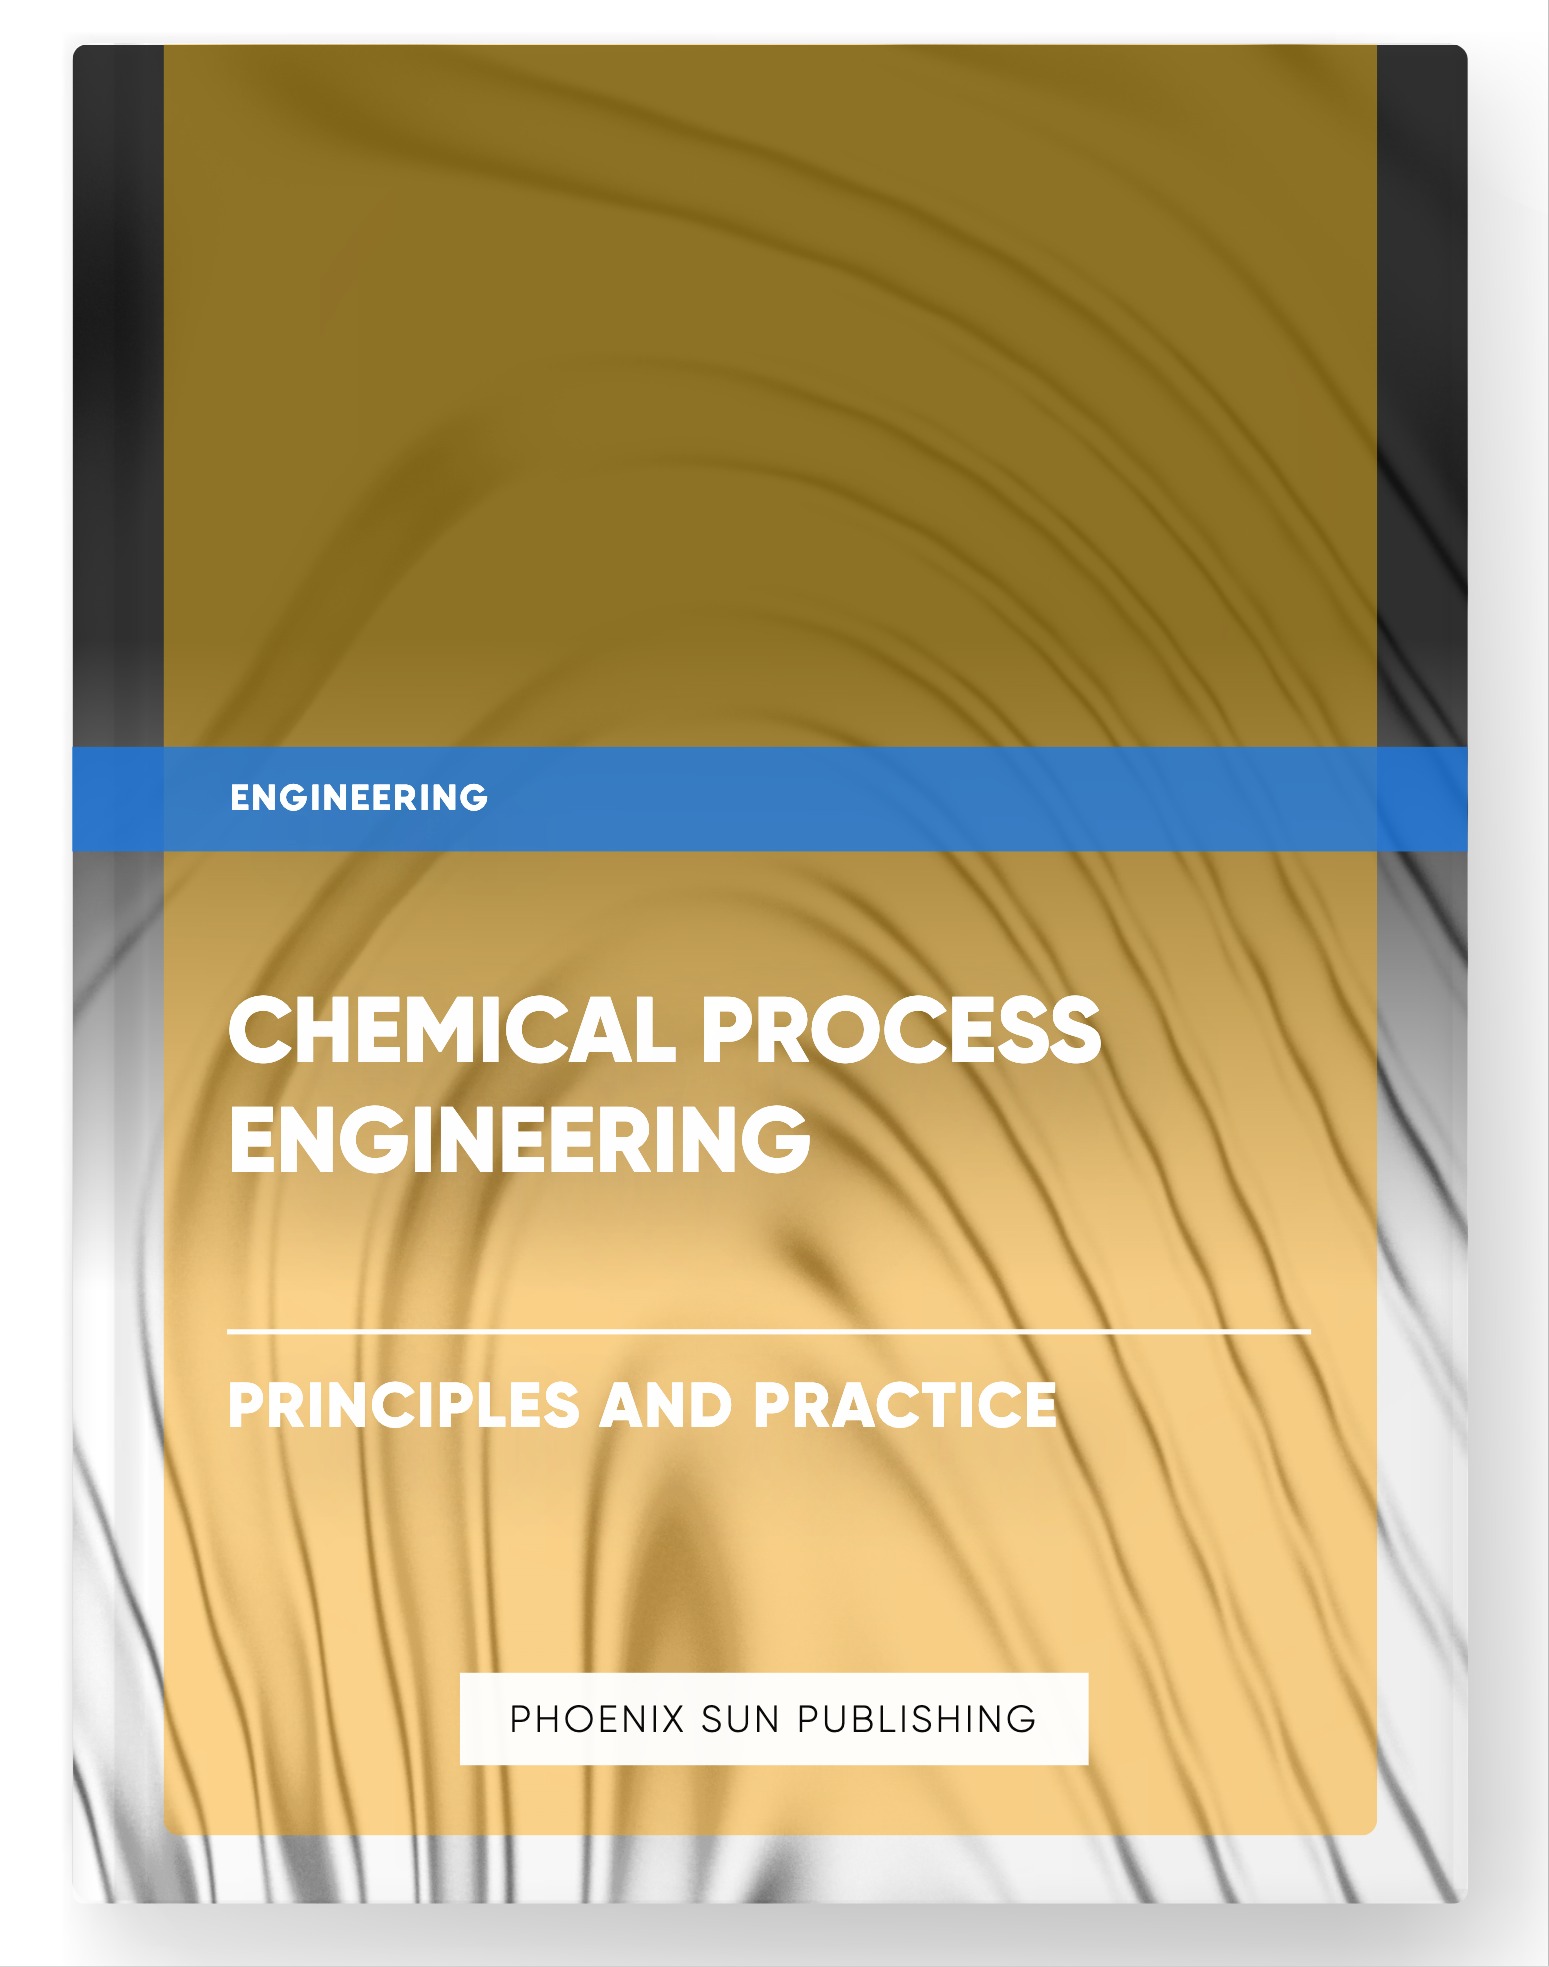 Chemical Process Engineering – Principles and Practice